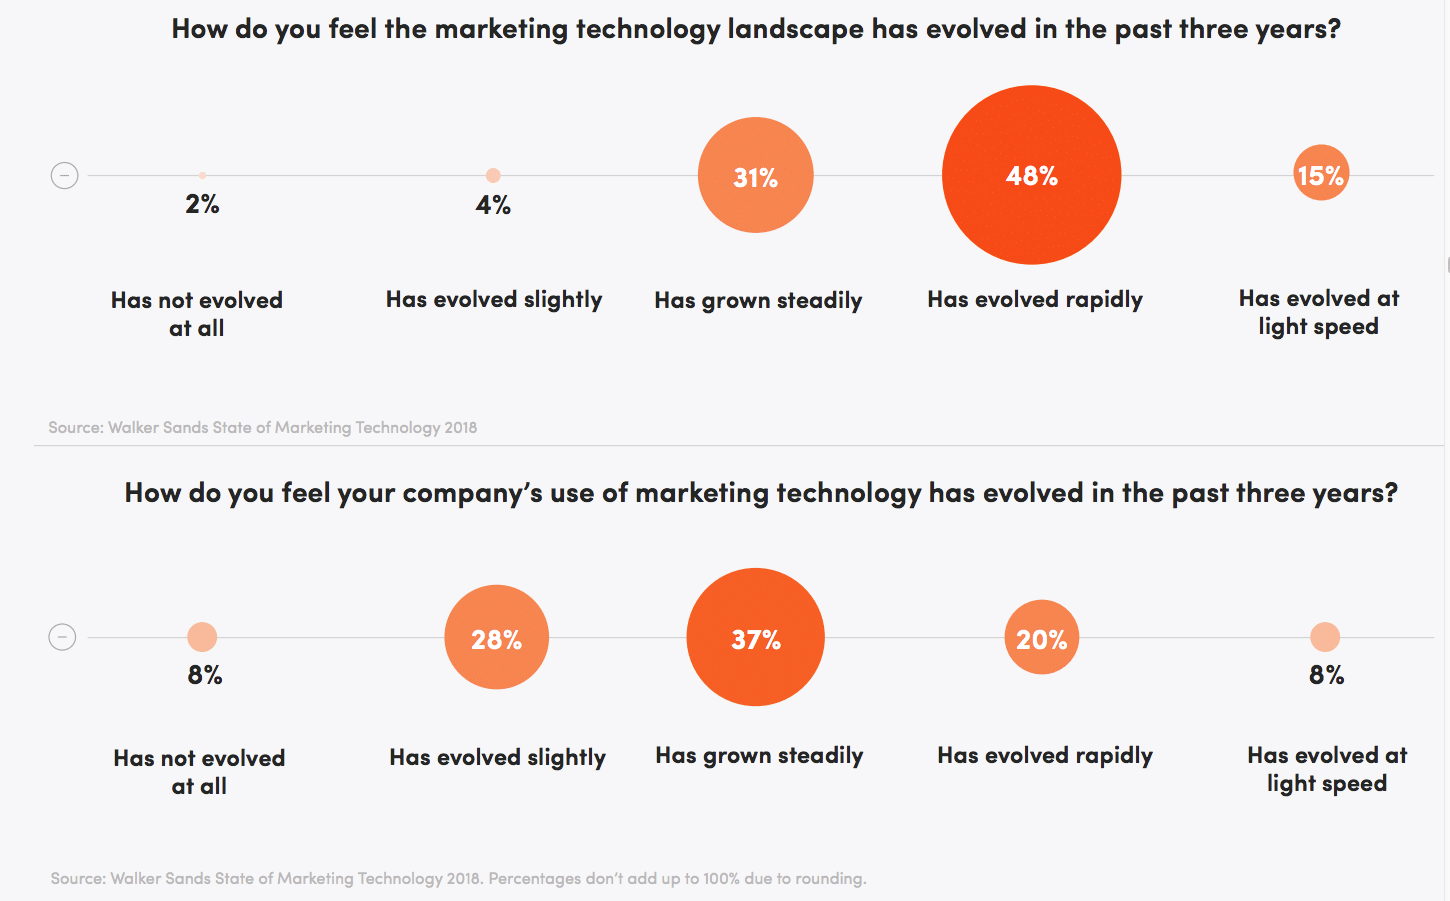 Marketers struggling to keep up with rapid rate of martech innovation